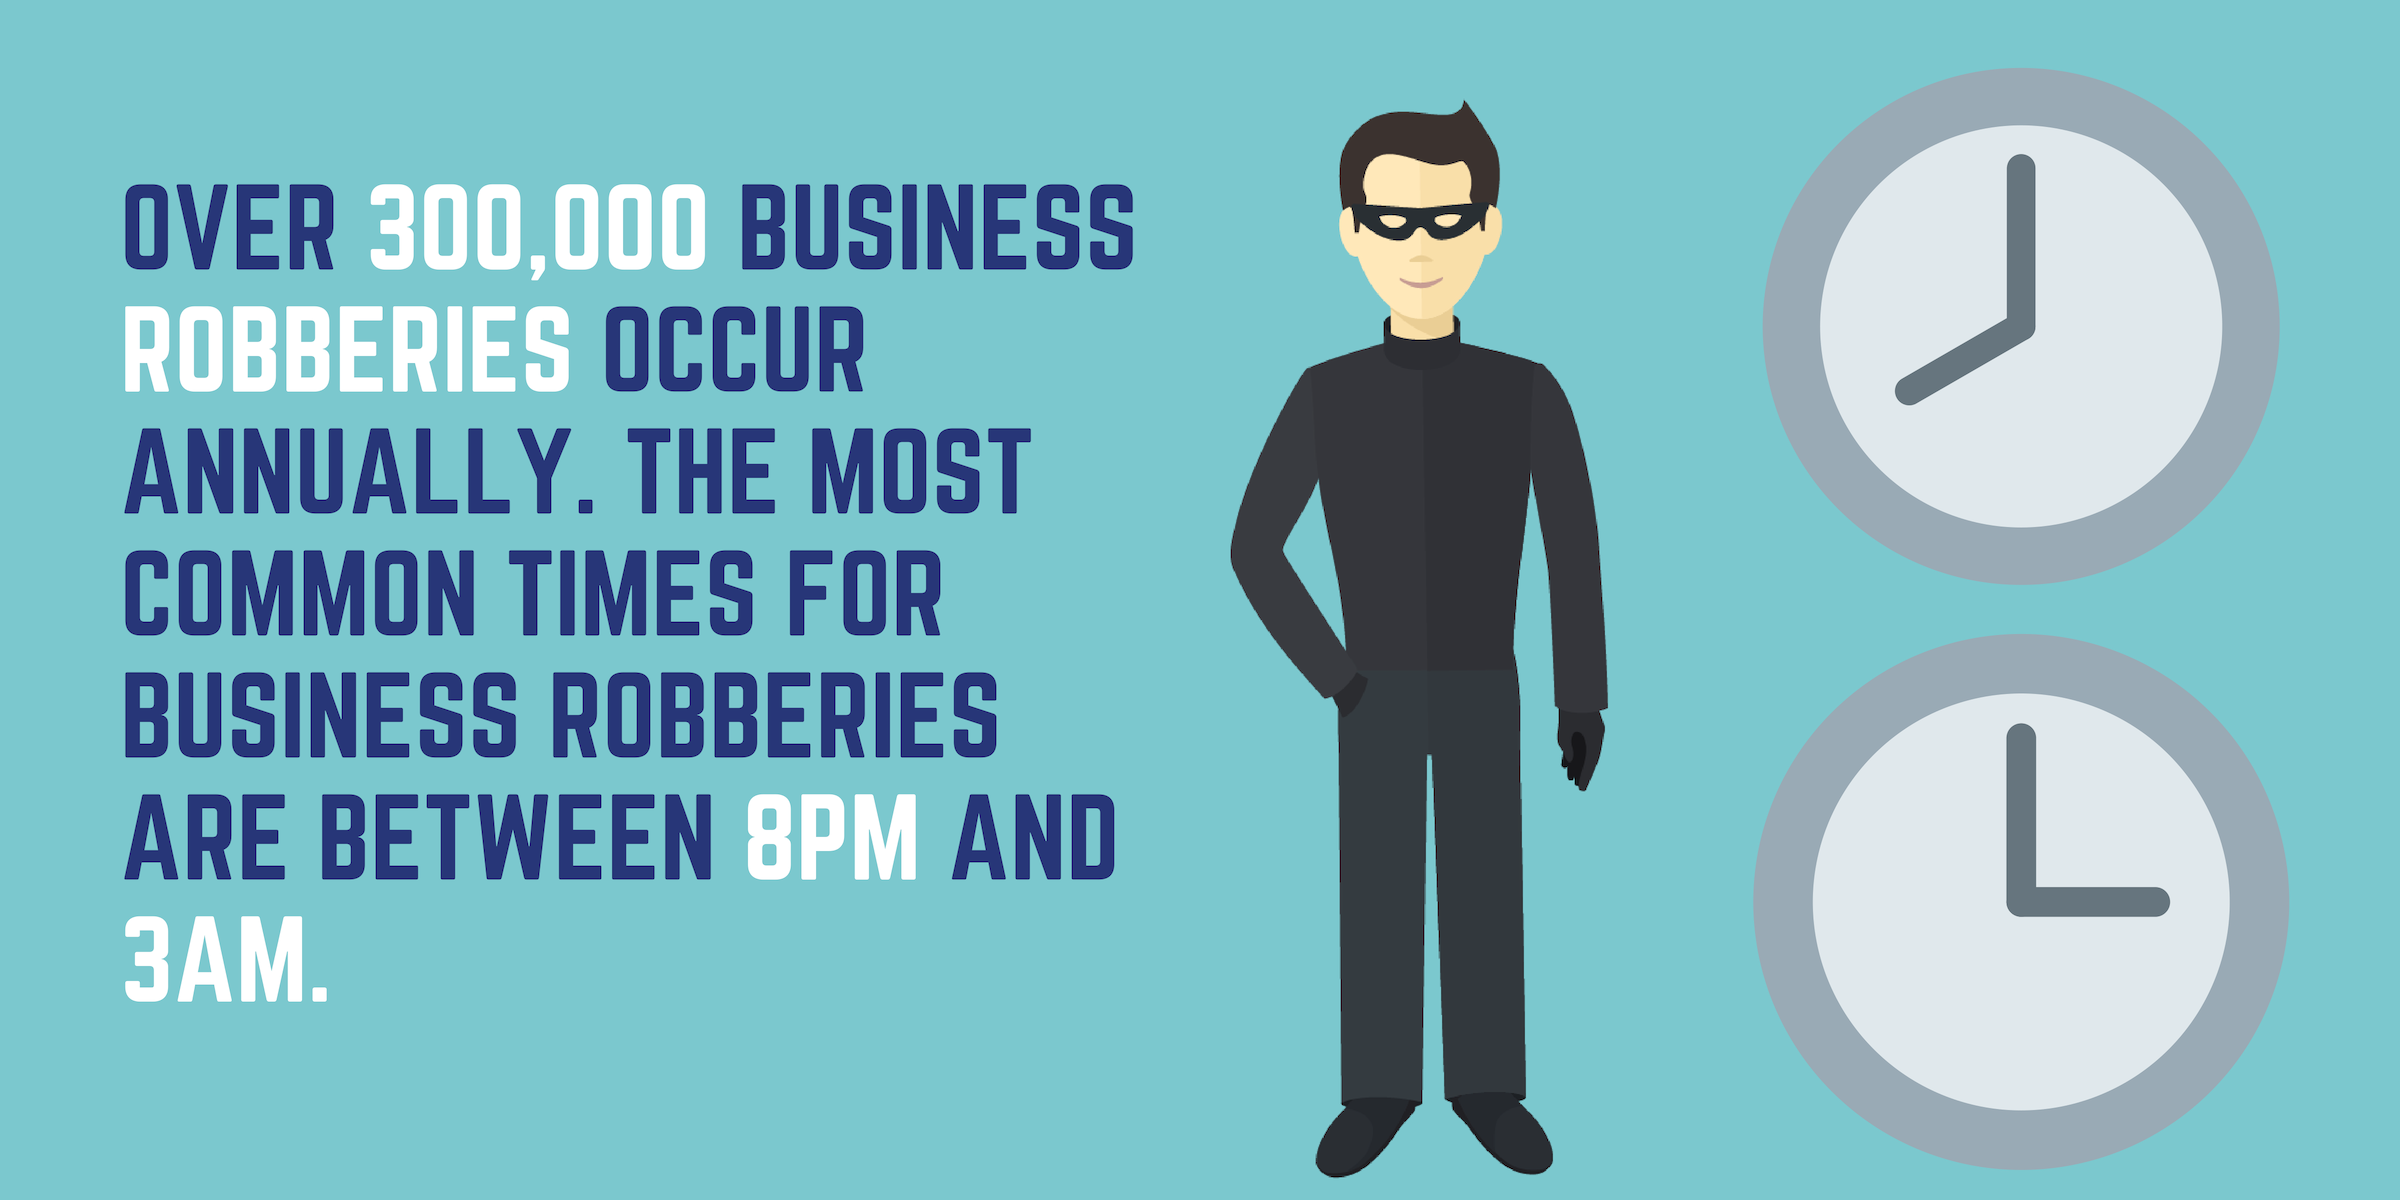 Over 300,000 business robberies occur annually. The most common times for business robberies are between 8pm and 3 am.